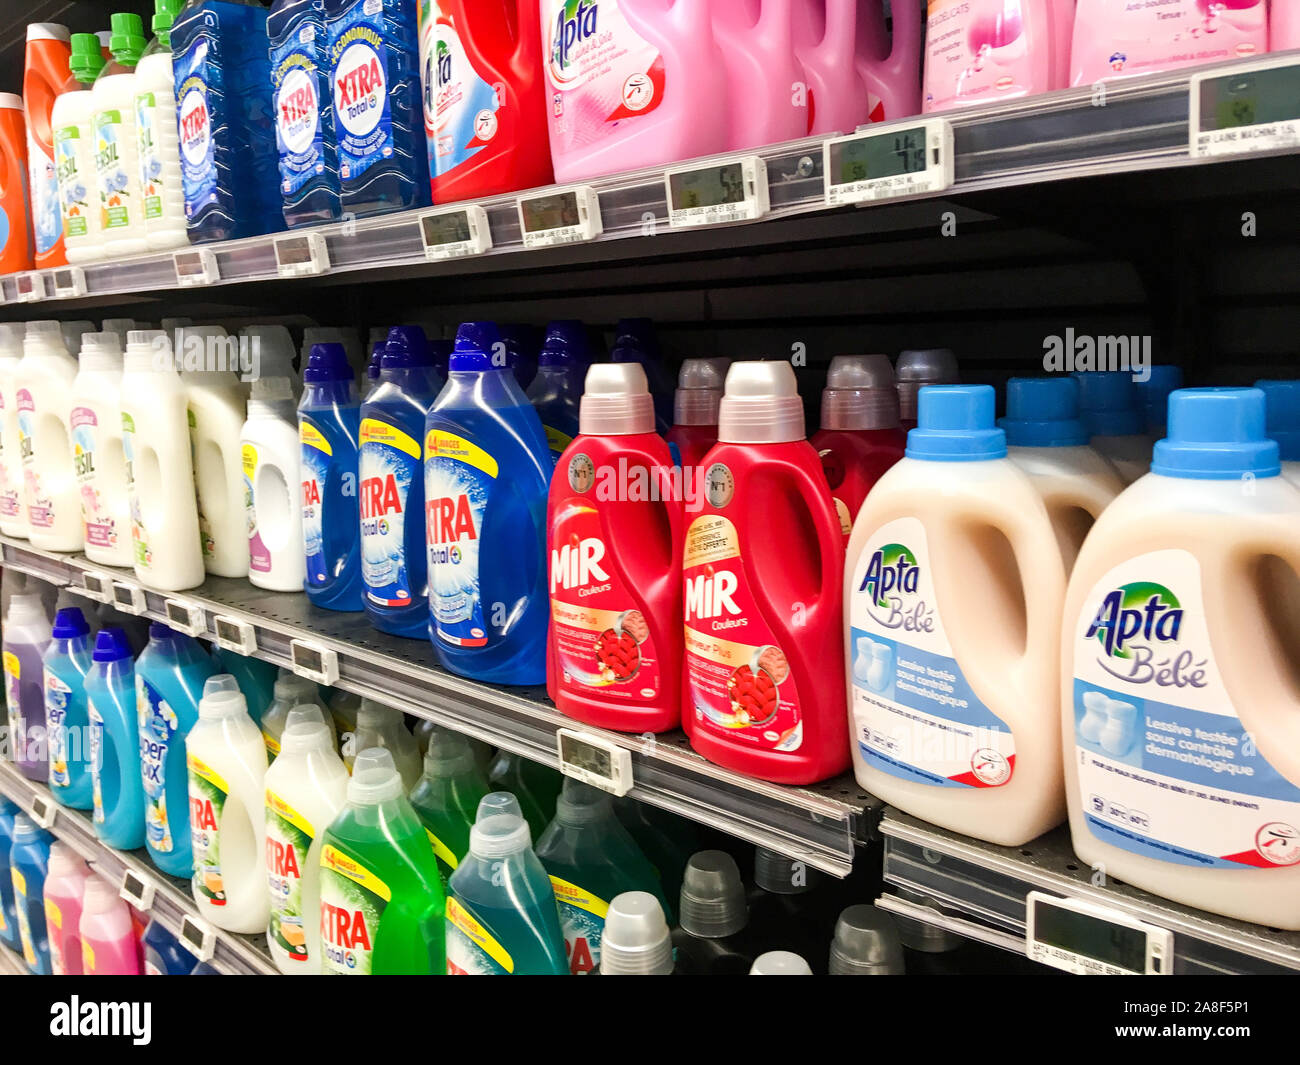 Hundreds of household products conditioned in plastic bottles, Lyon, France Stock Photo